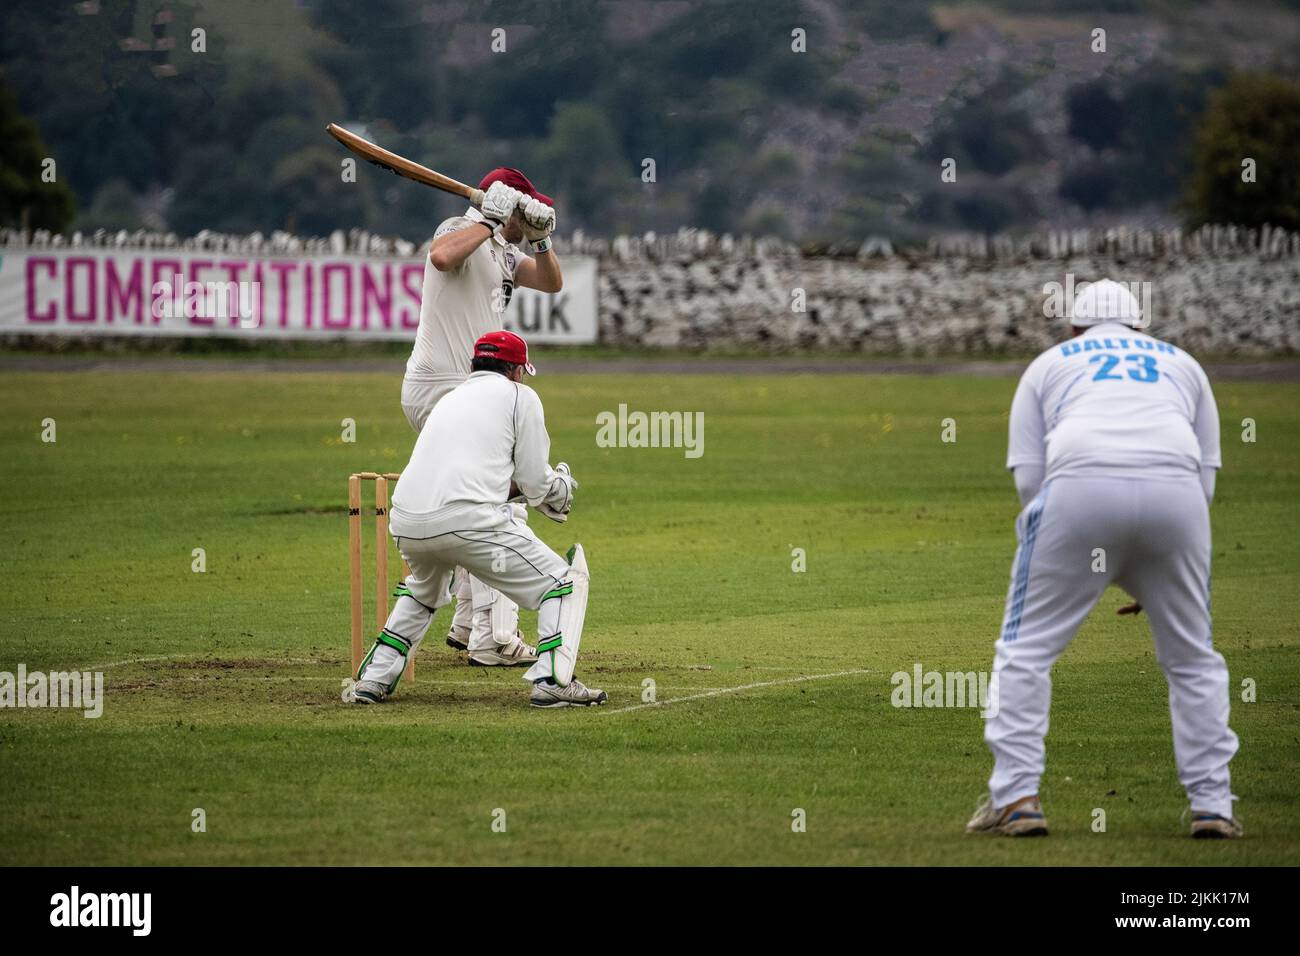 Cricket Batsman about to hit the ball, watched by a wicket keeper and fielder during a weekend local village cricket match in Huddersfield, Yorkshire Stock Photo